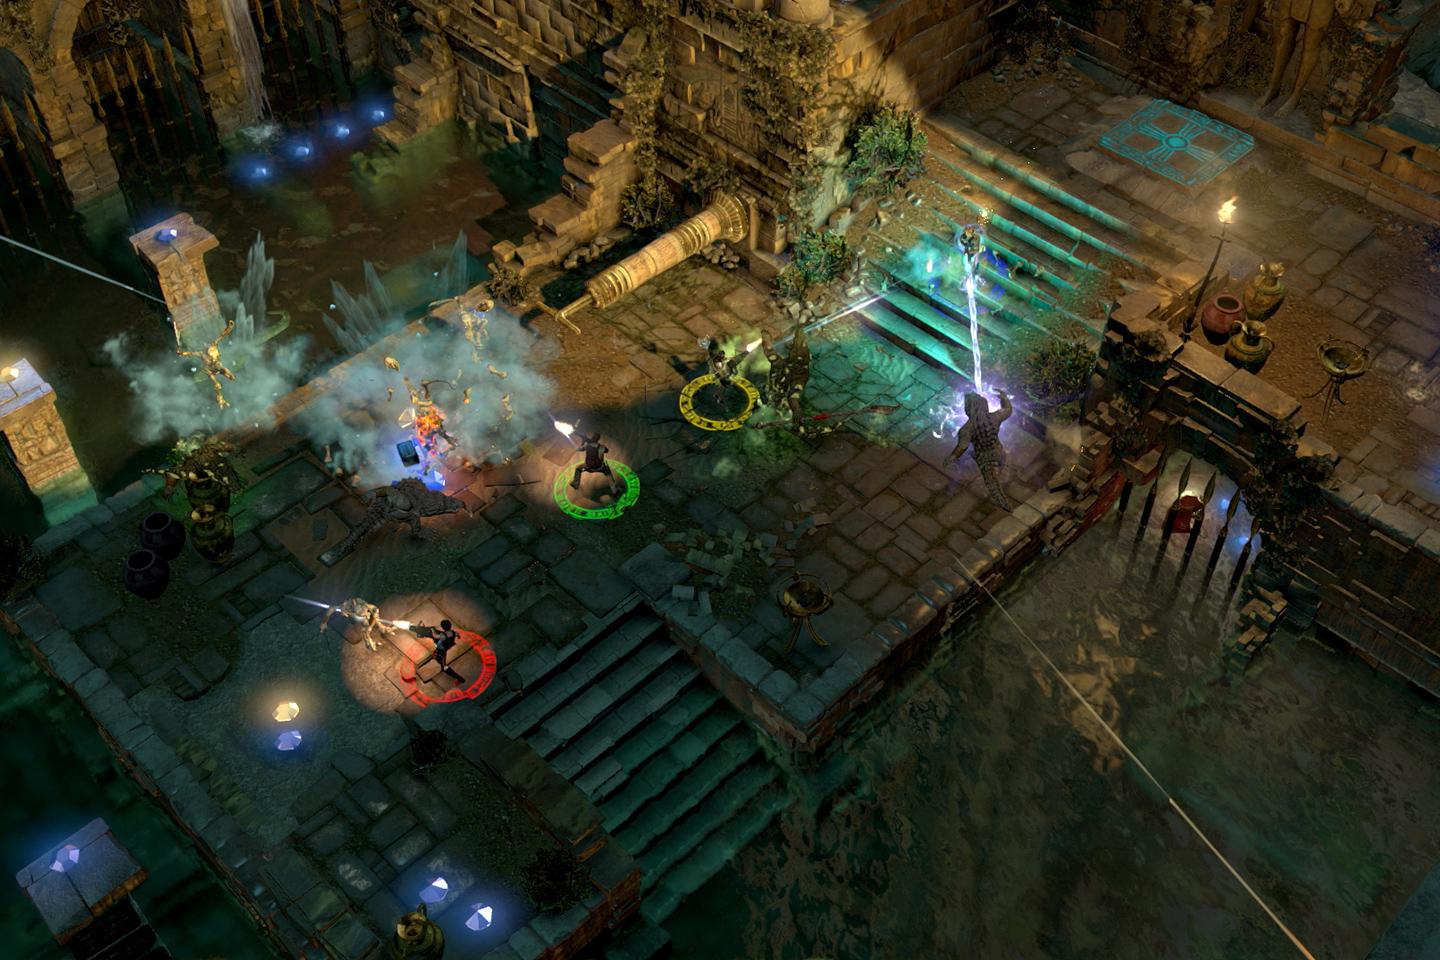 A strategic combat scene from a Tomb Raider game, with characters positioned across a temple battleground, casting spells and fighting off a ghostly blue apparition.